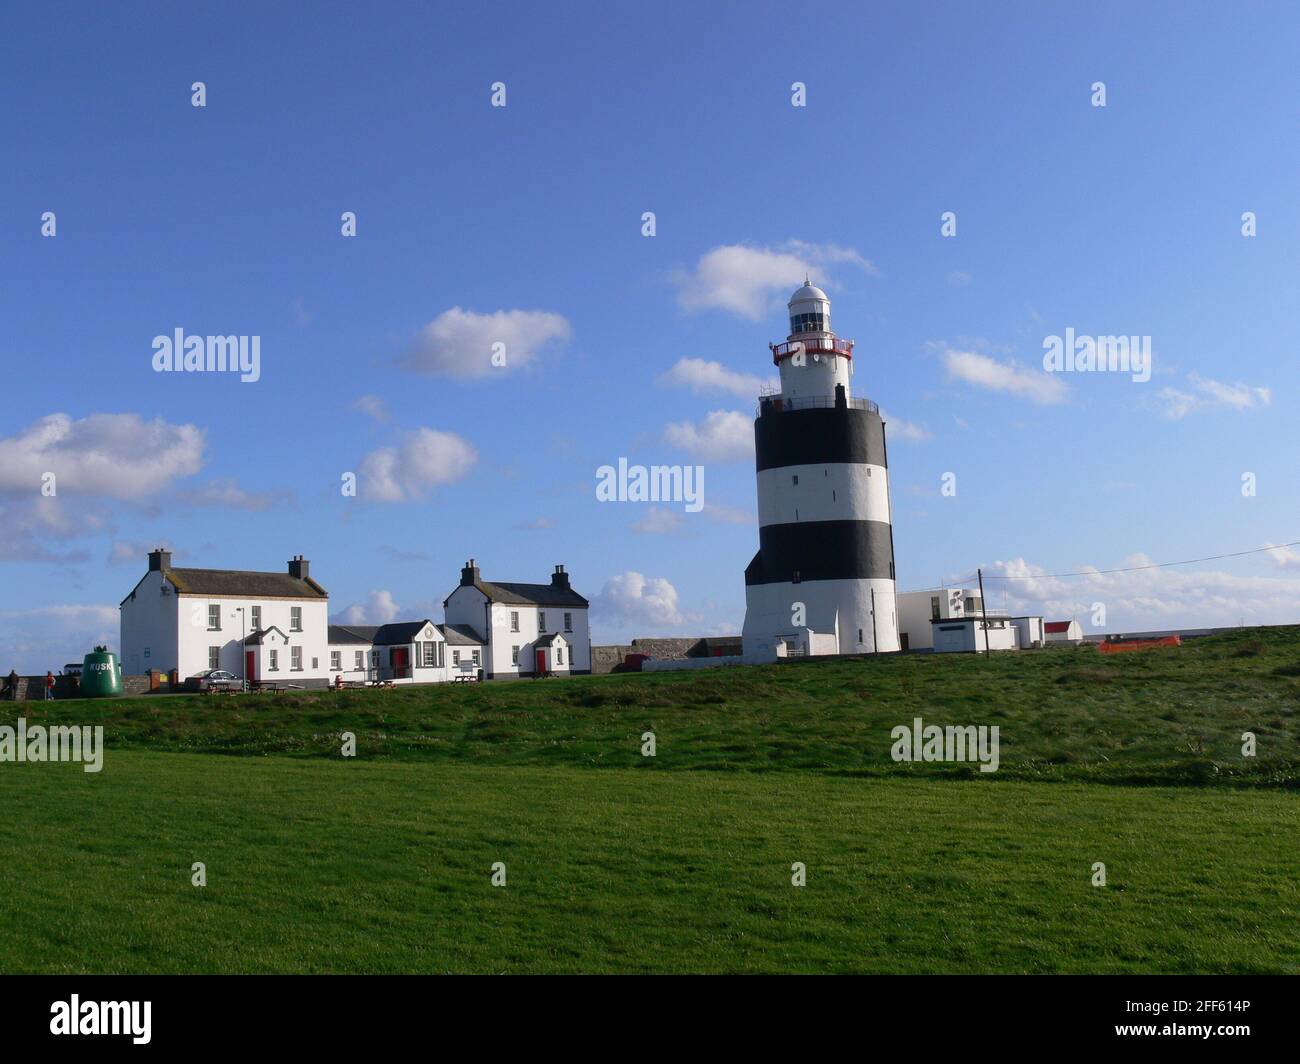 IRELAND, COUNTY WEXFORD, HOOK HEAD - OCTOBER 01, 2008: Hook Lighthouse is one of the oldest lighthouses in the world Stock Photo